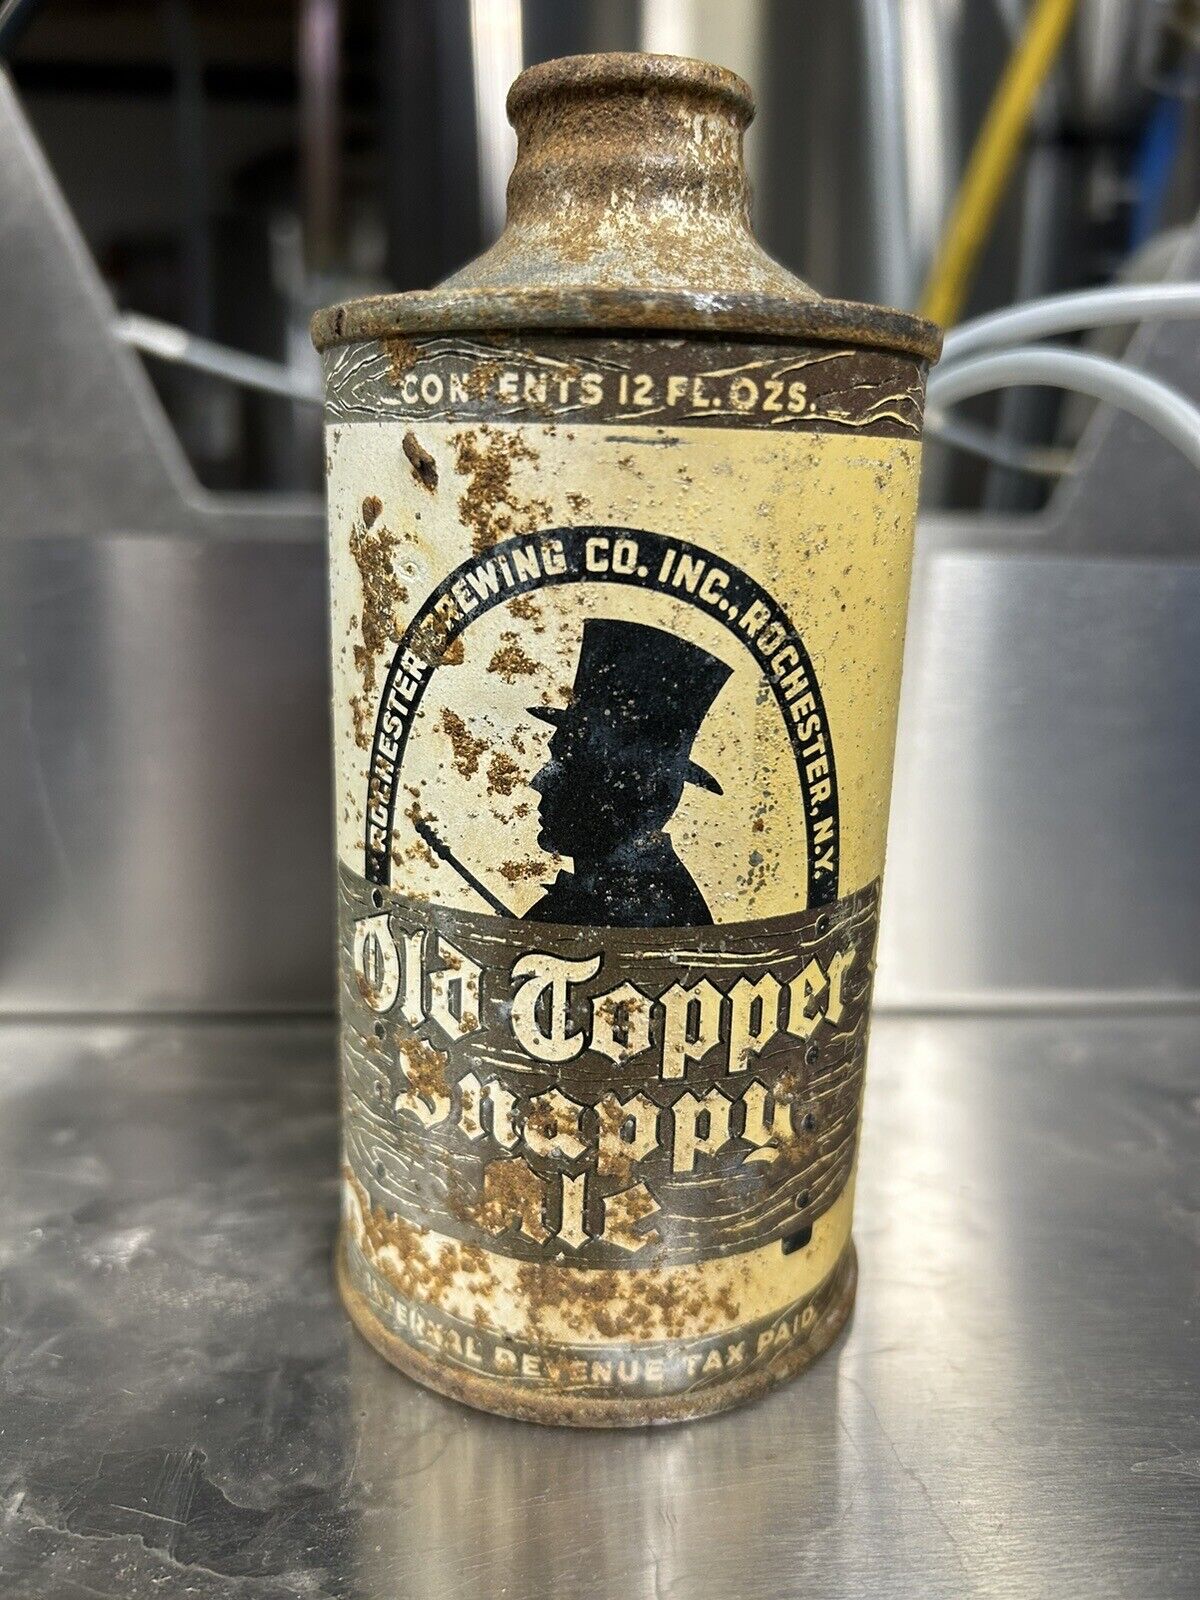 Old Topper Snappy Ale J Spout Cone Top Beer Can Rochester, NY